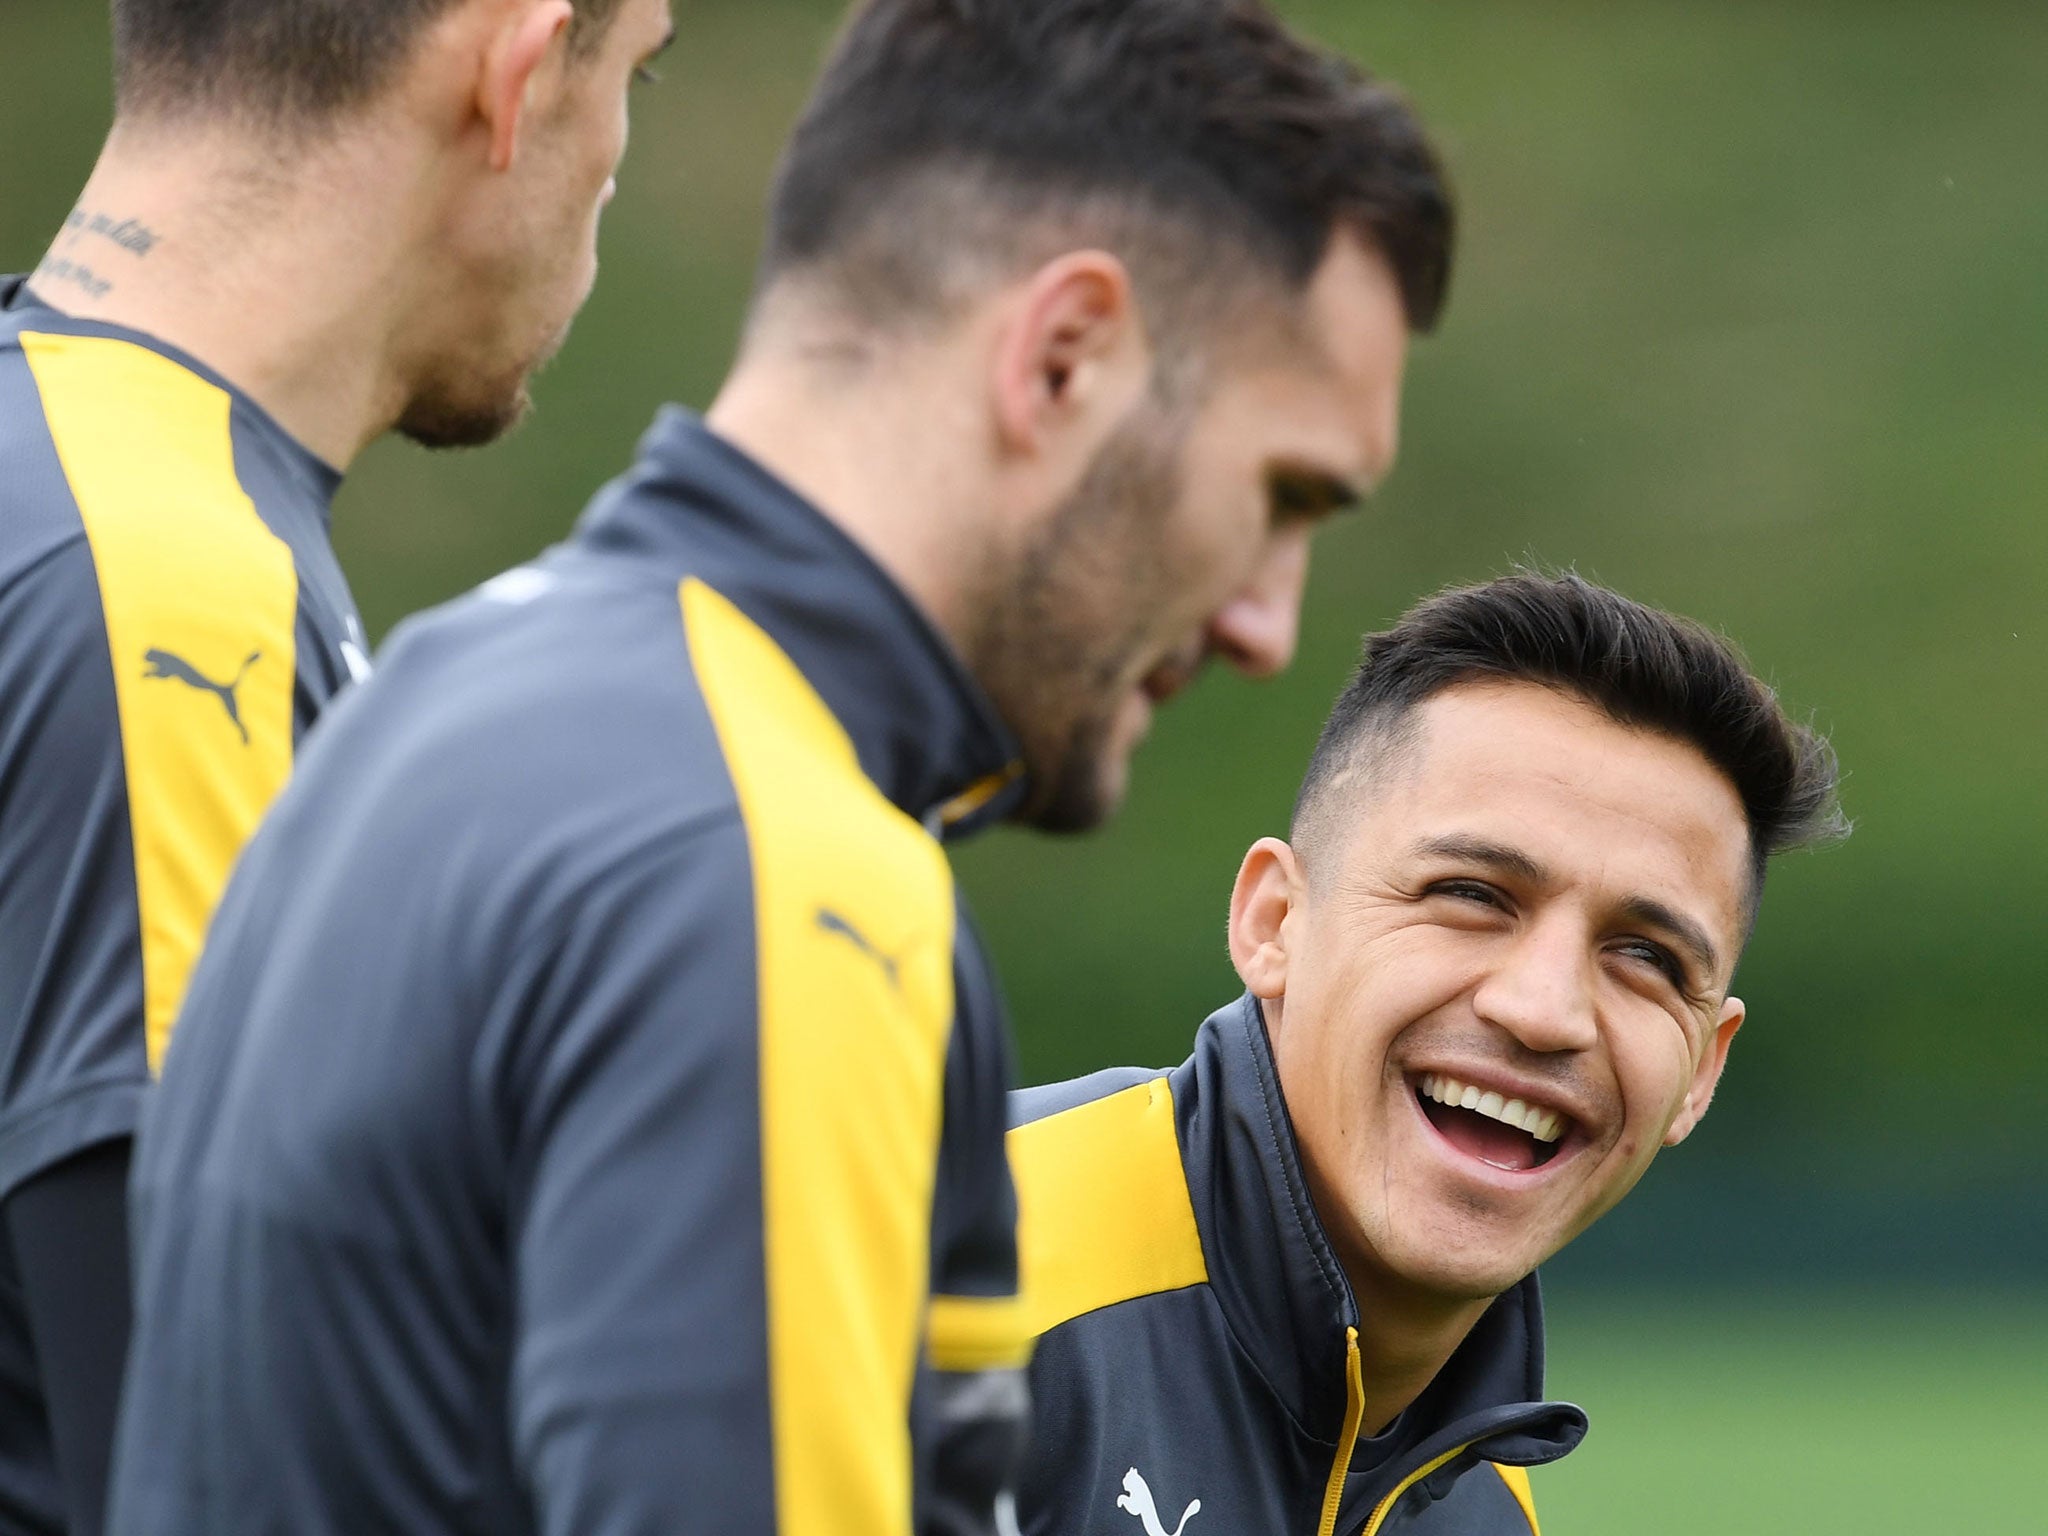 Alexis Sanchez has been linked with a move away from Arsenal in the summer